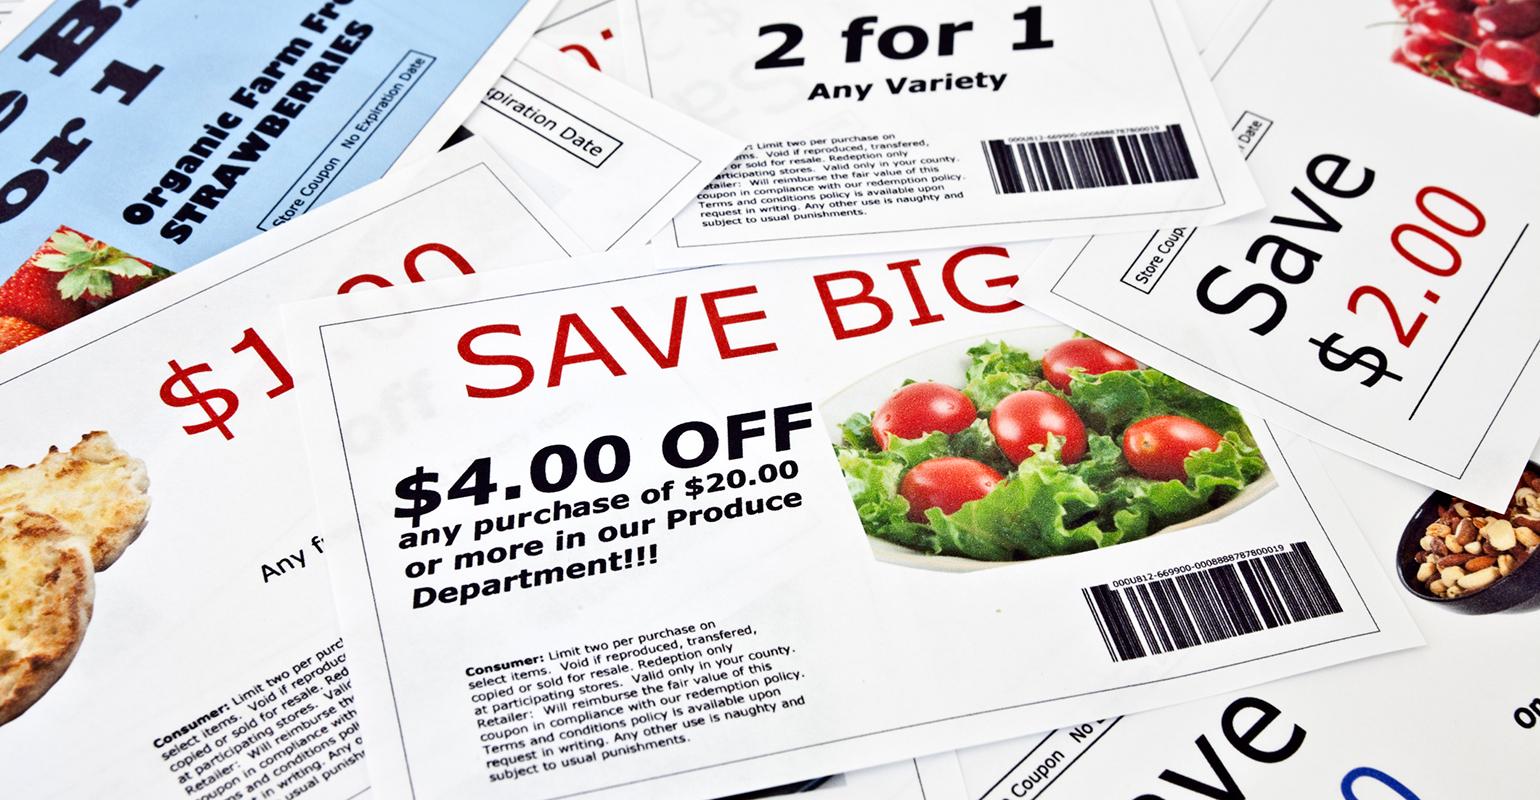 Viewpoint: Study shows coupons change buyer behavior